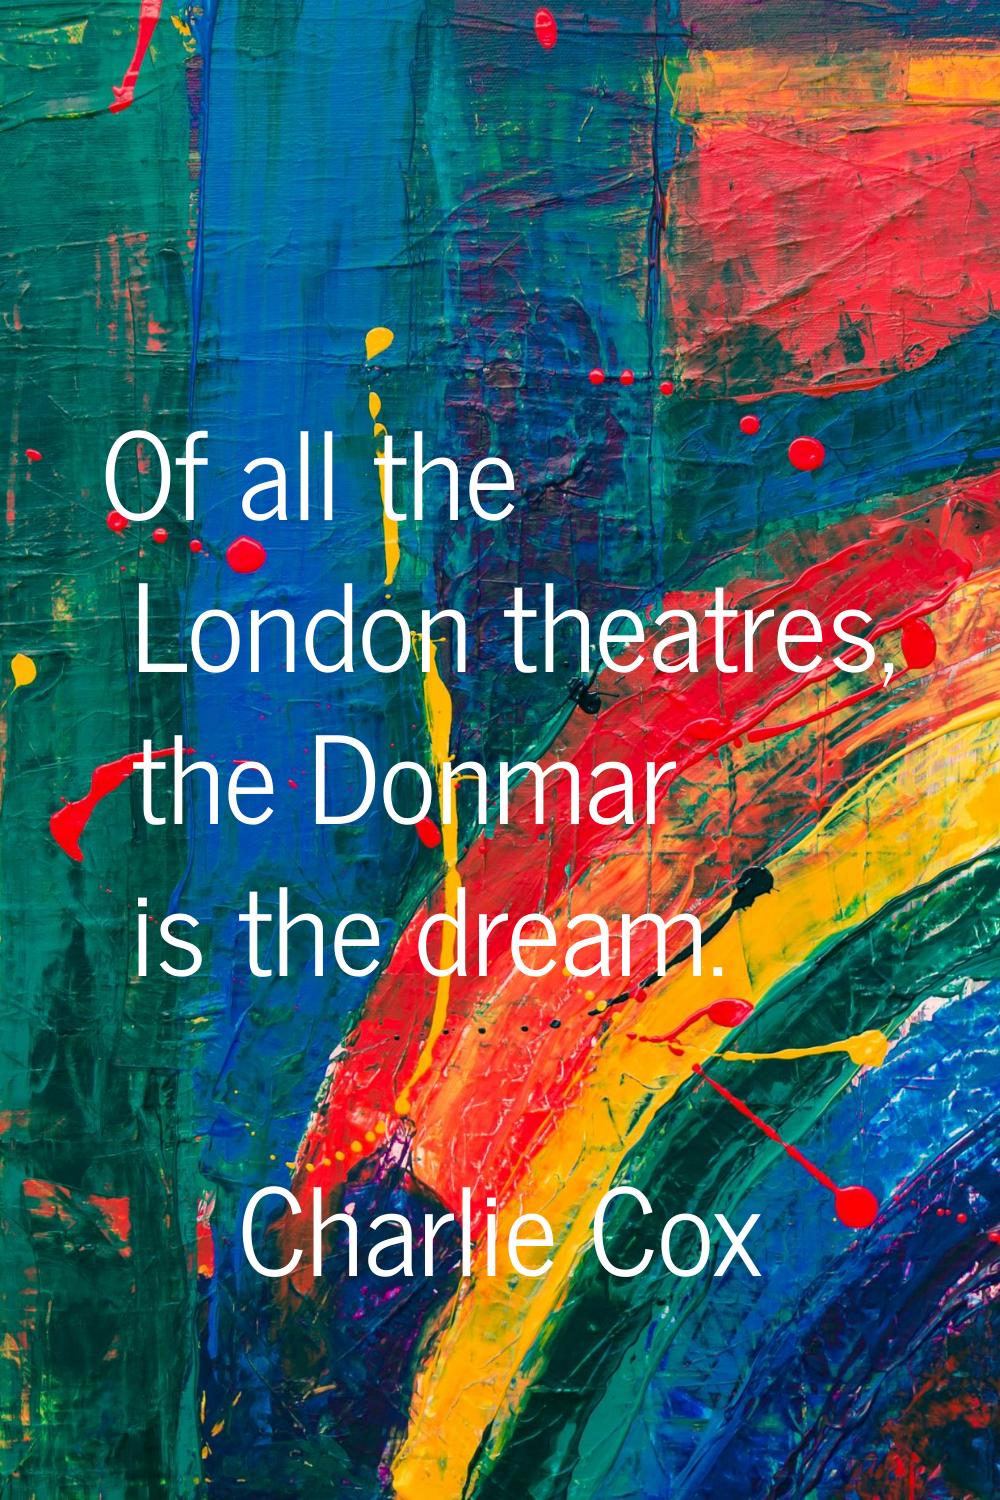 Of all the London theatres, the Donmar is the dream.